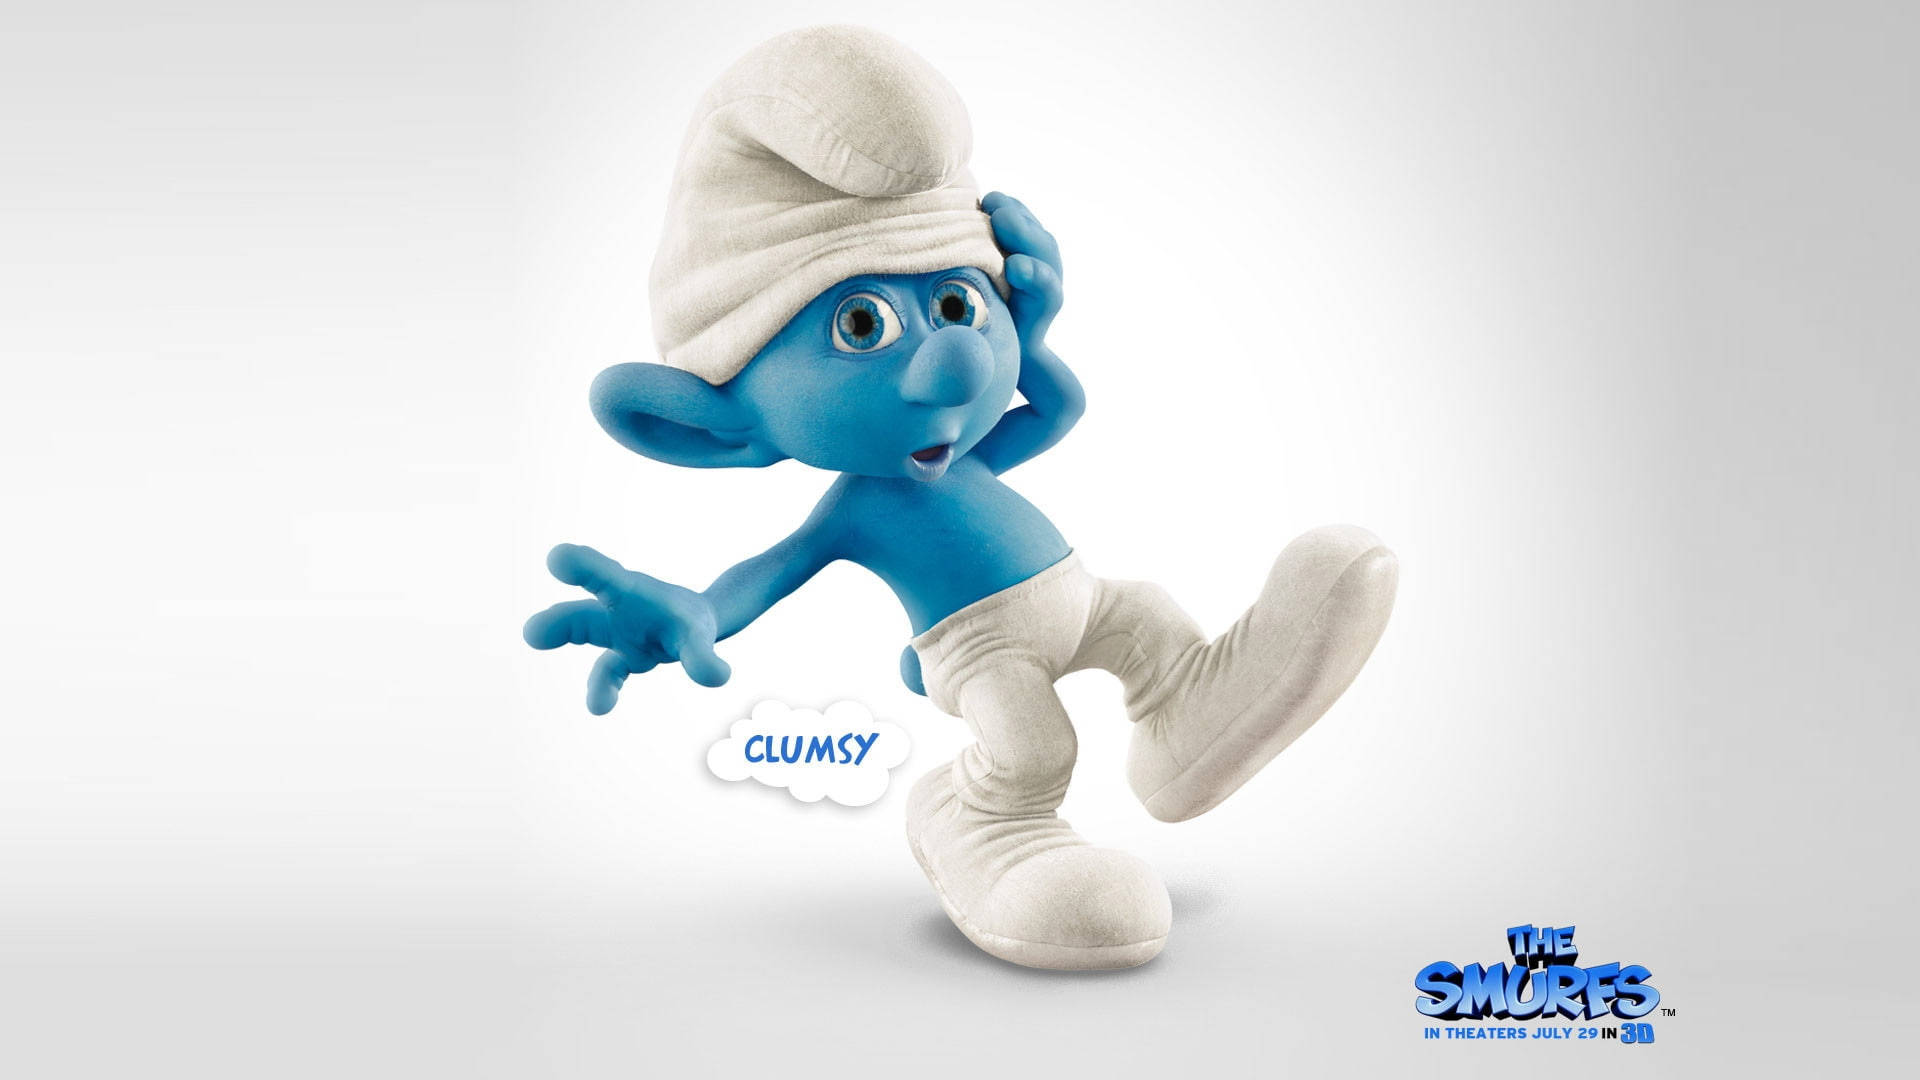 The Smurfs Clumsy Smurf Background